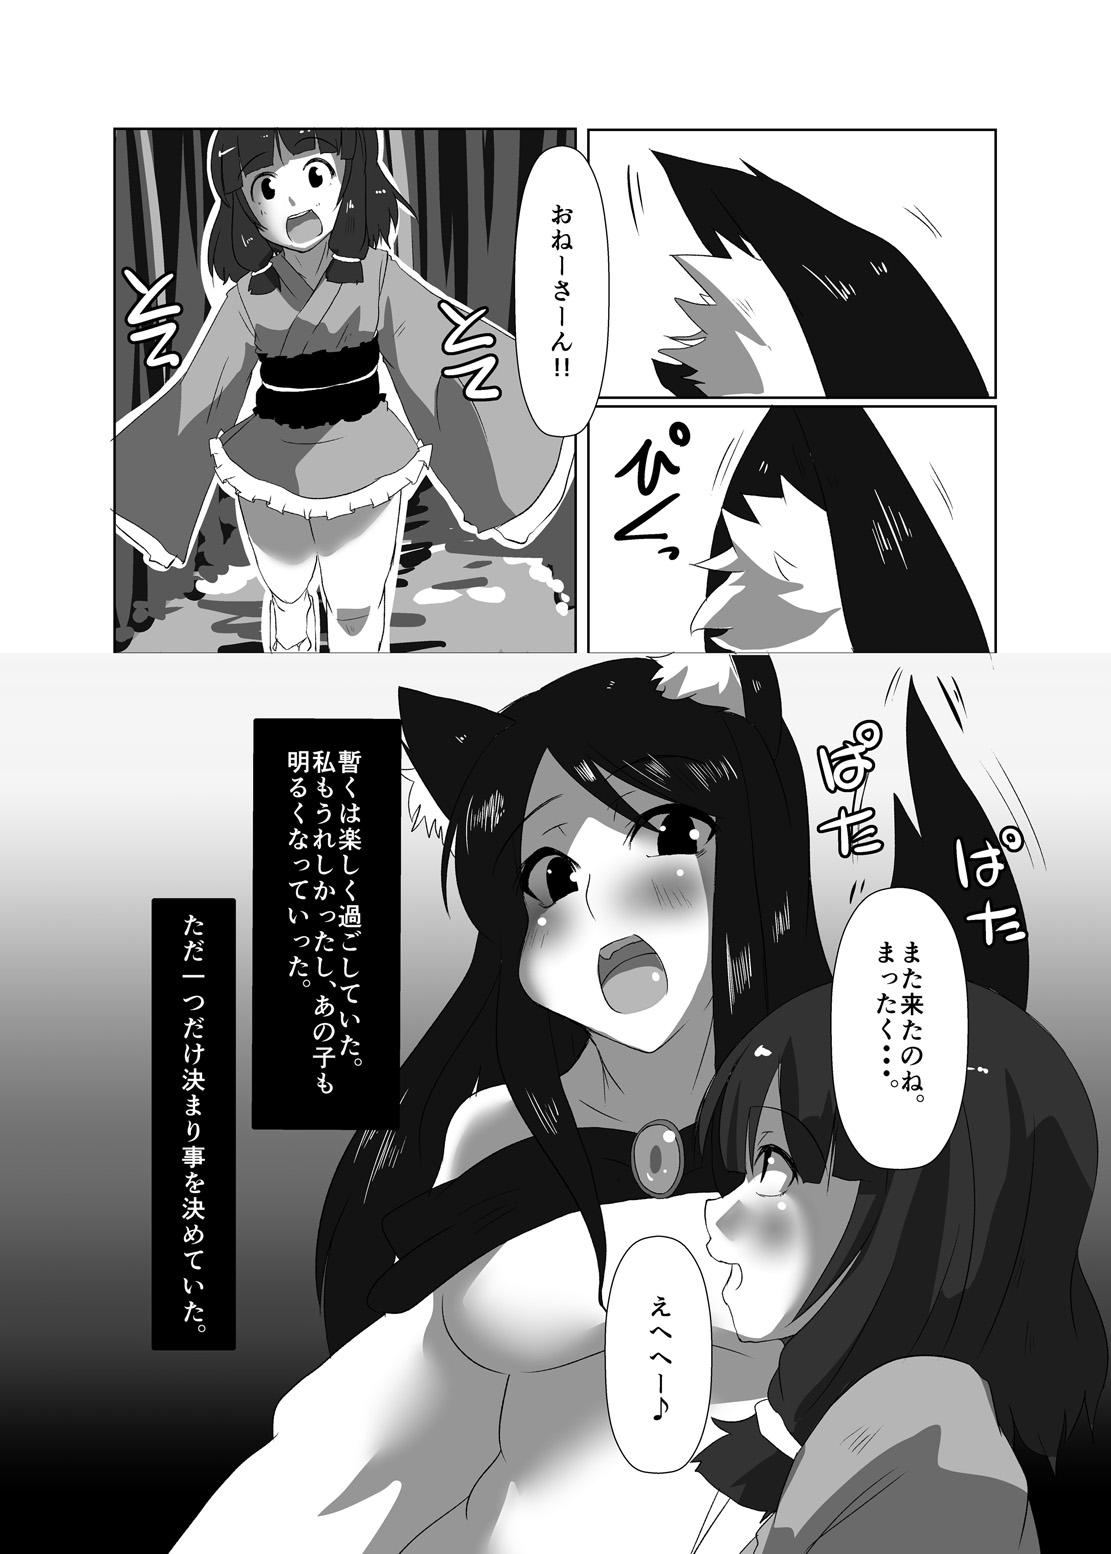 ELonely Wolf no Onee-san 11